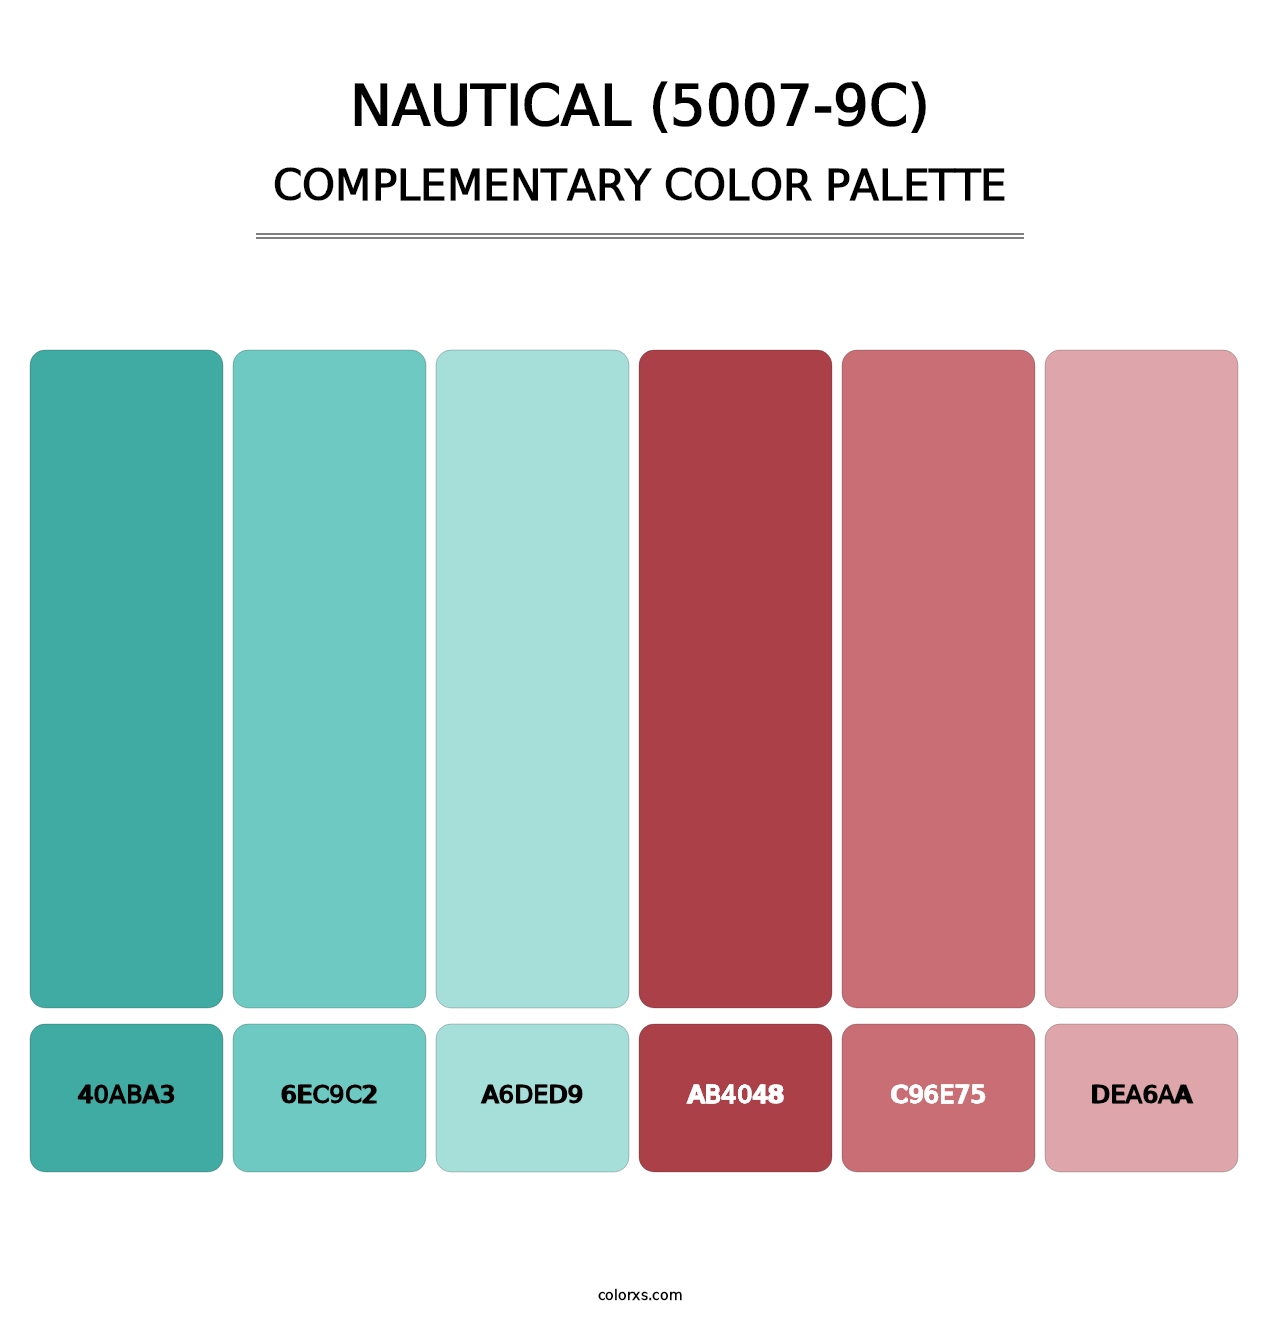 Nautical (5007-9C) - Complementary Color Palette